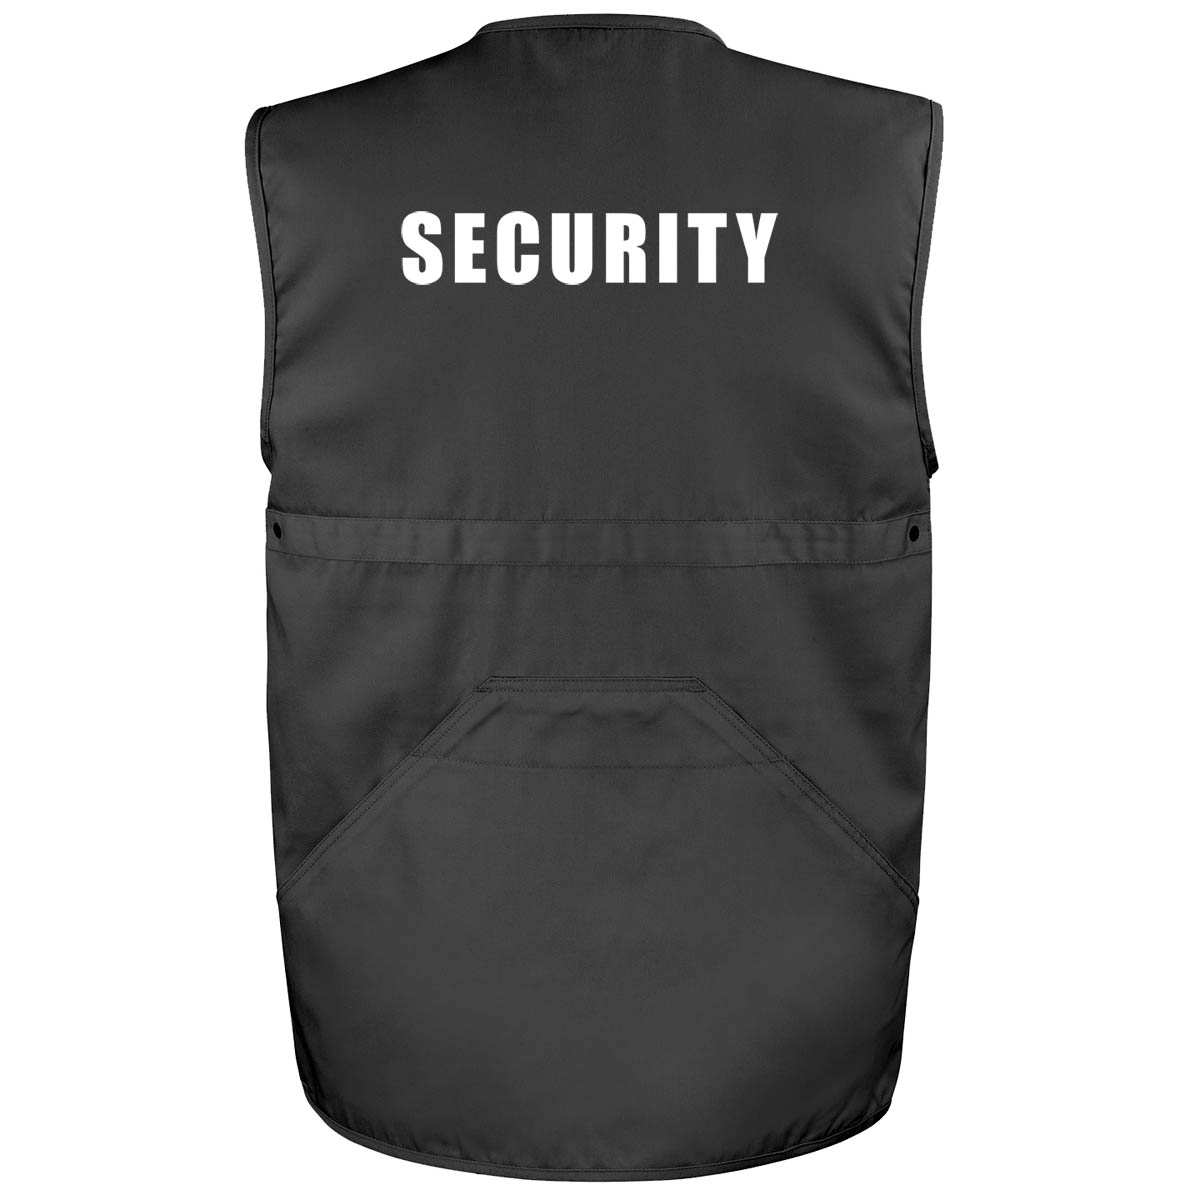 RE45A_SECURITY-BACK